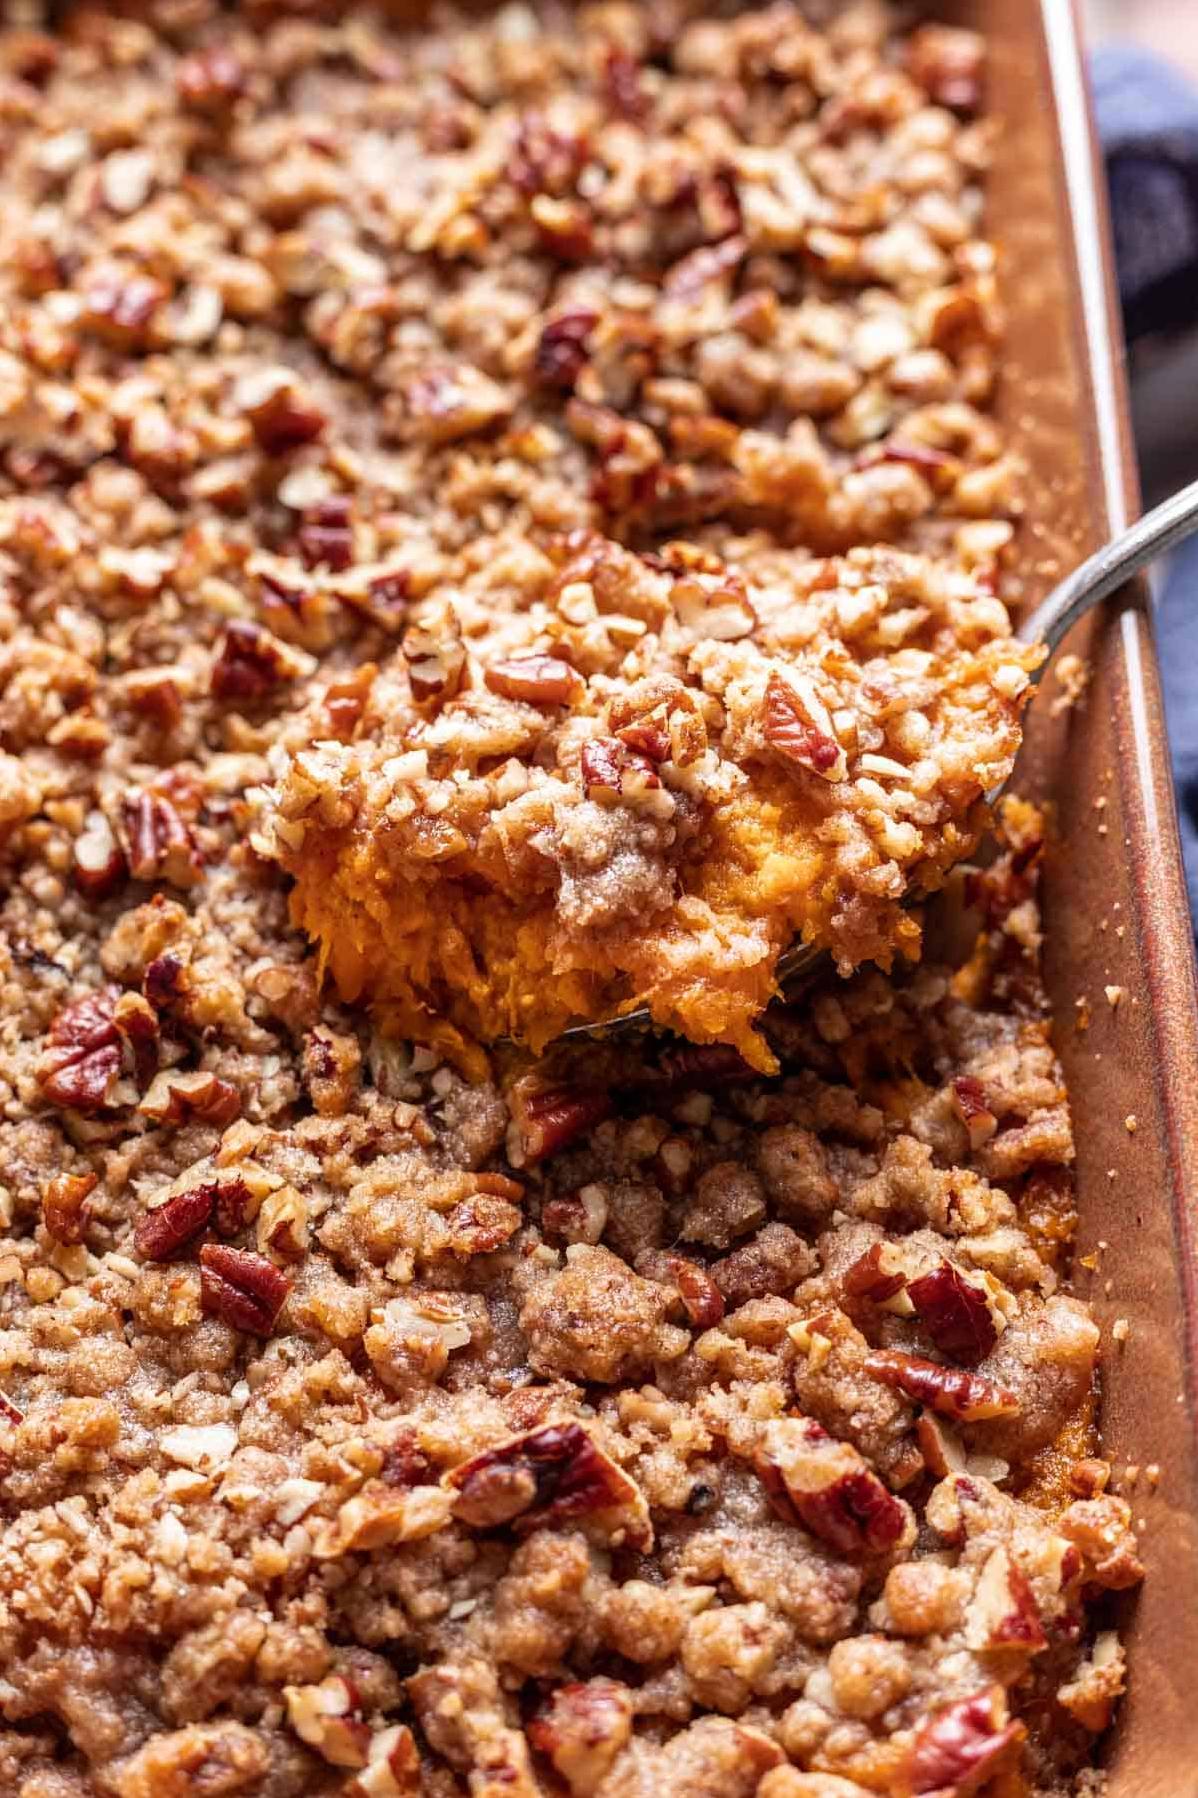  Watch out, this sweet potato crunch casserole might just become your new favorite cozy dish!